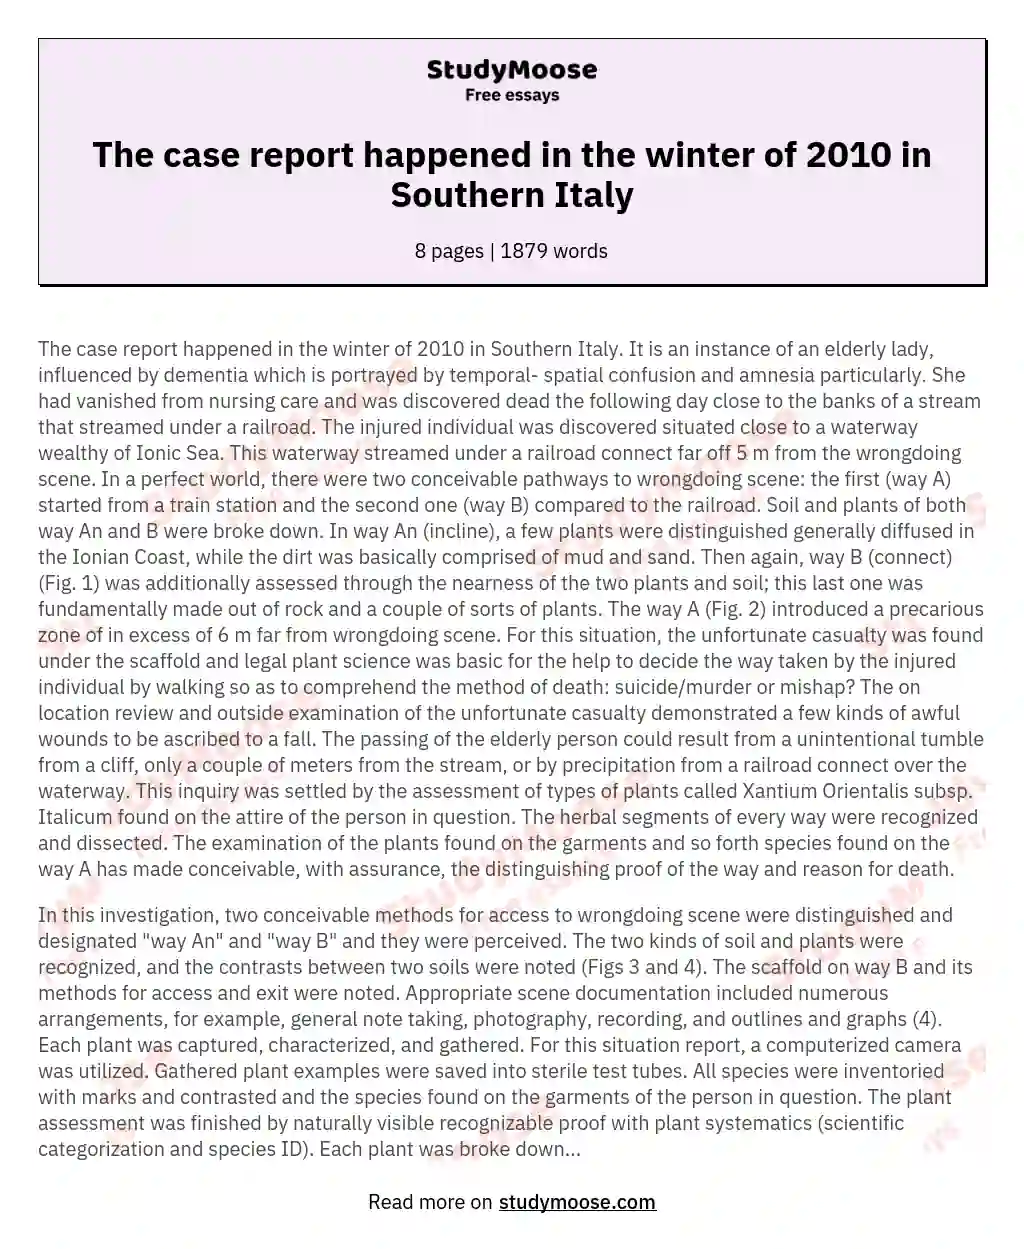 The case report happened in the winter of 2010 in Southern Italy essay